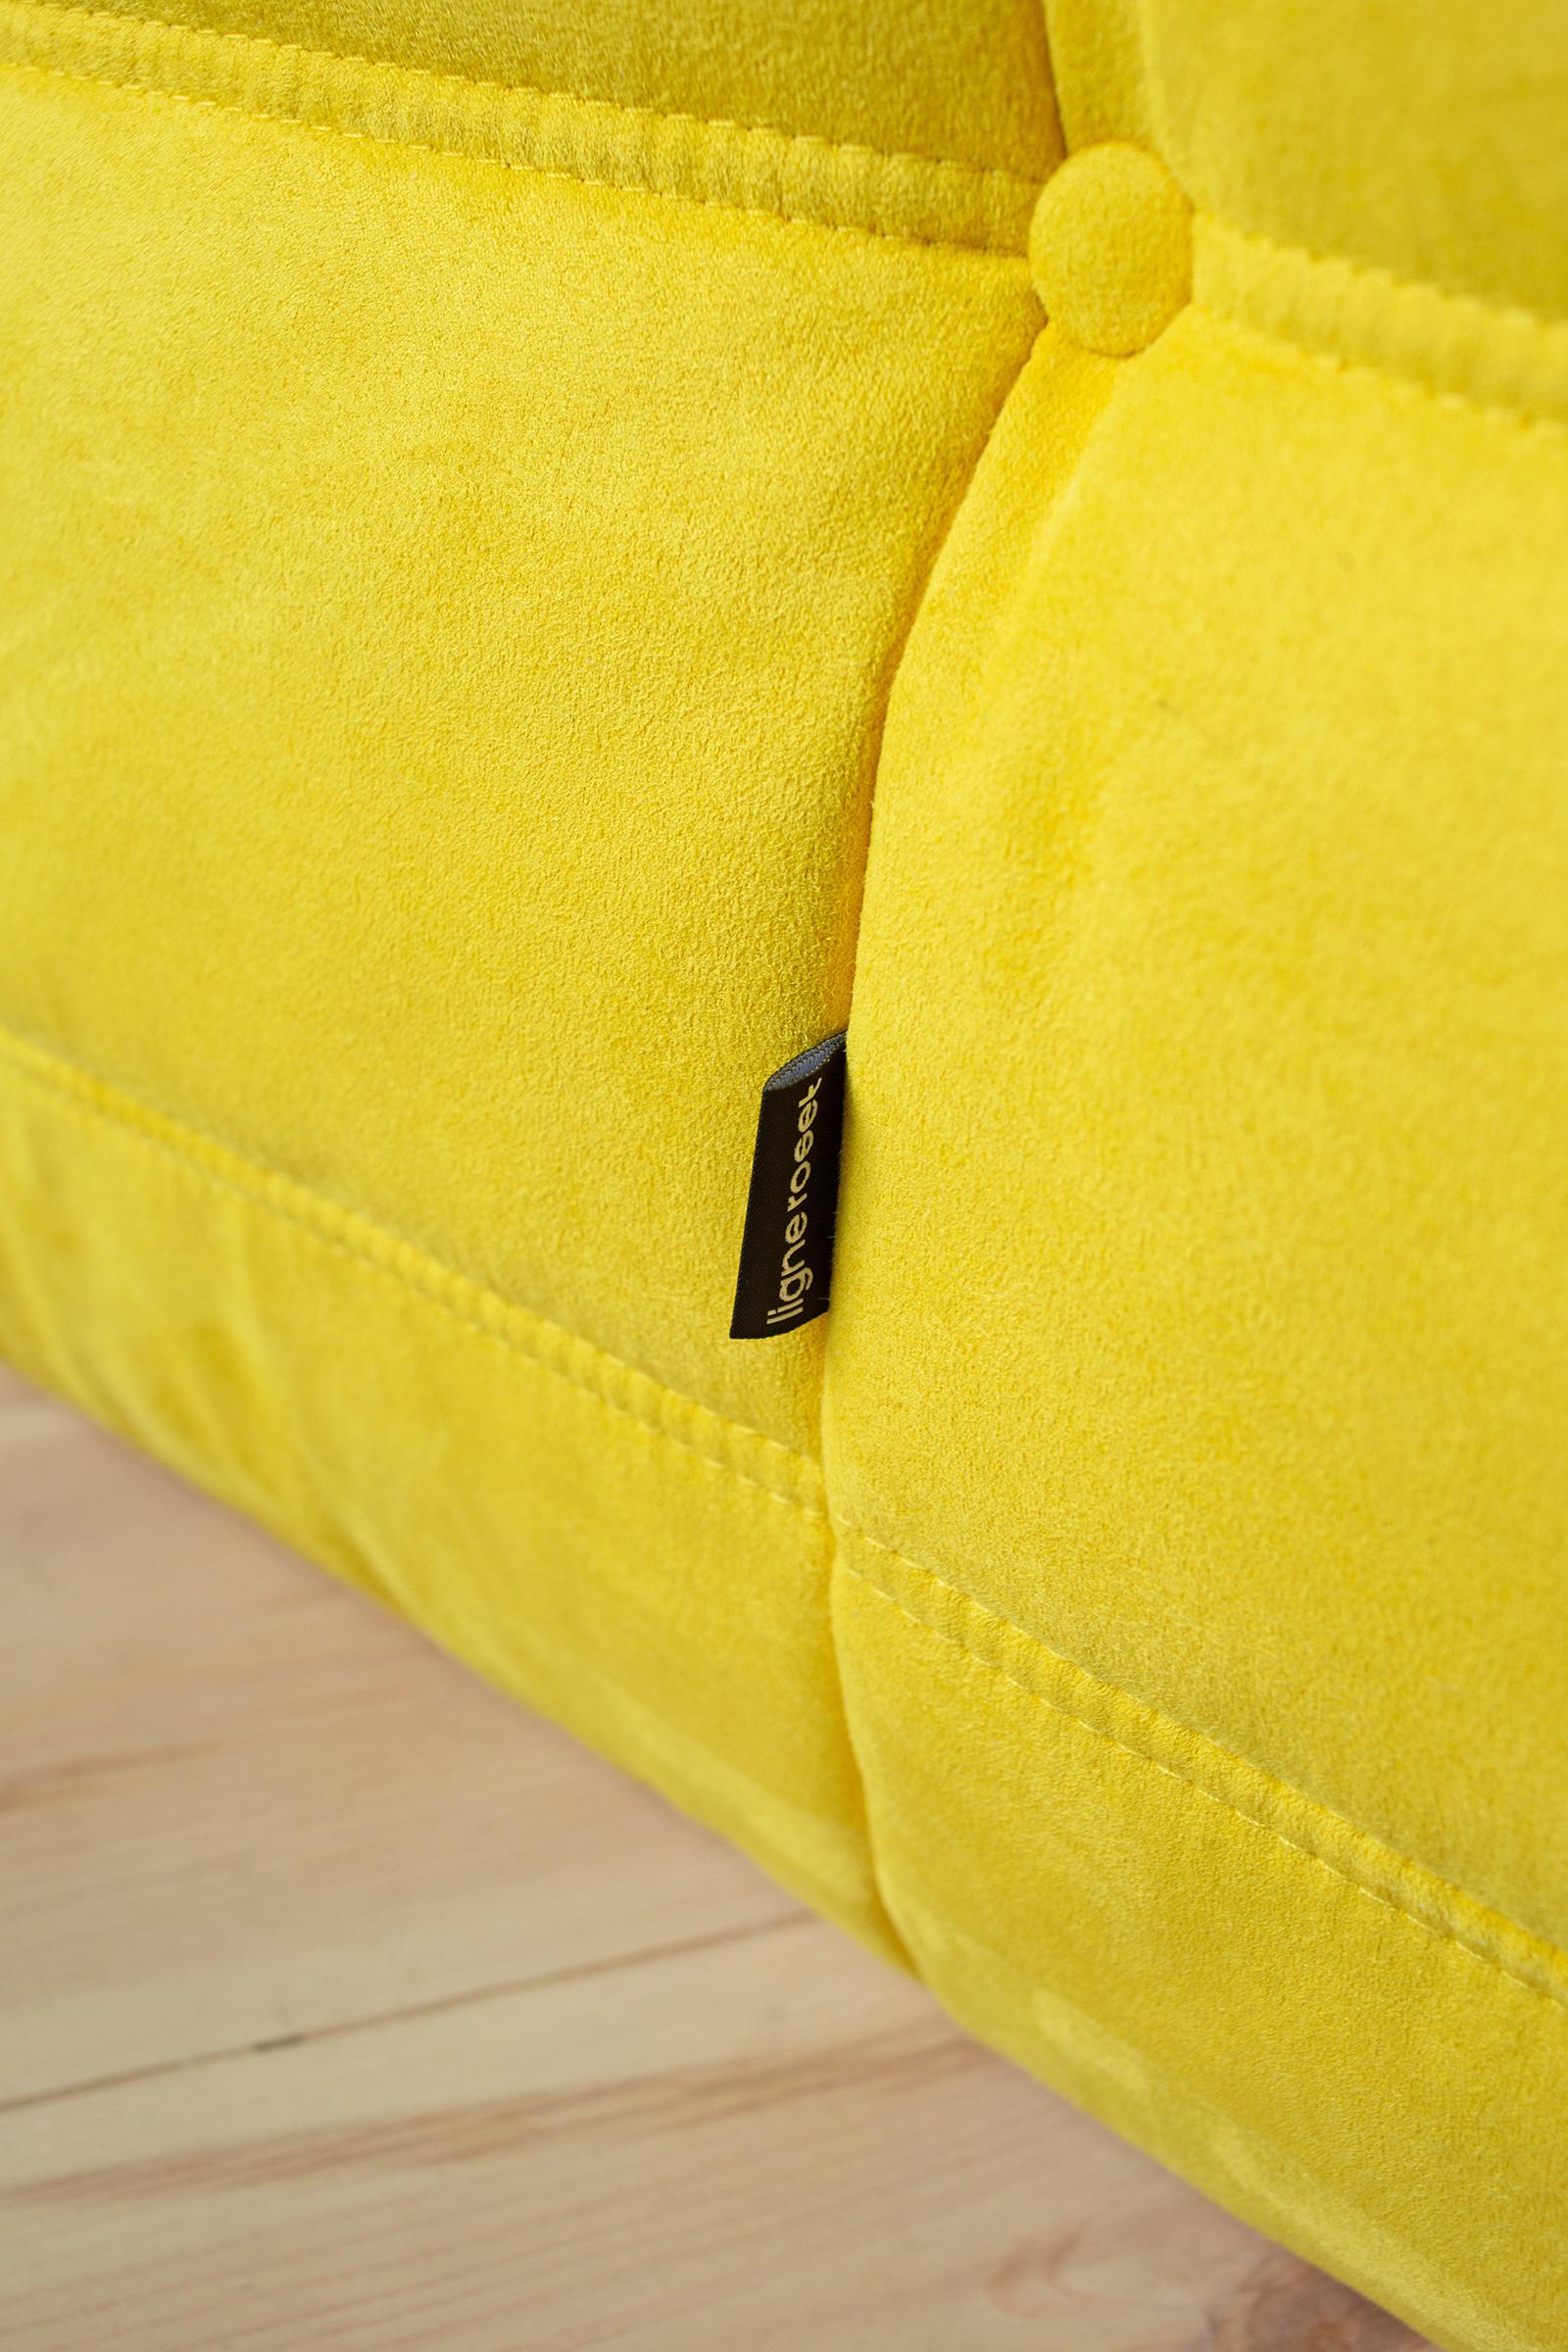 Togo Sofa Set by Michel Ducaroy for Ligne Roset, in Yellow Microfibre For Sale 7